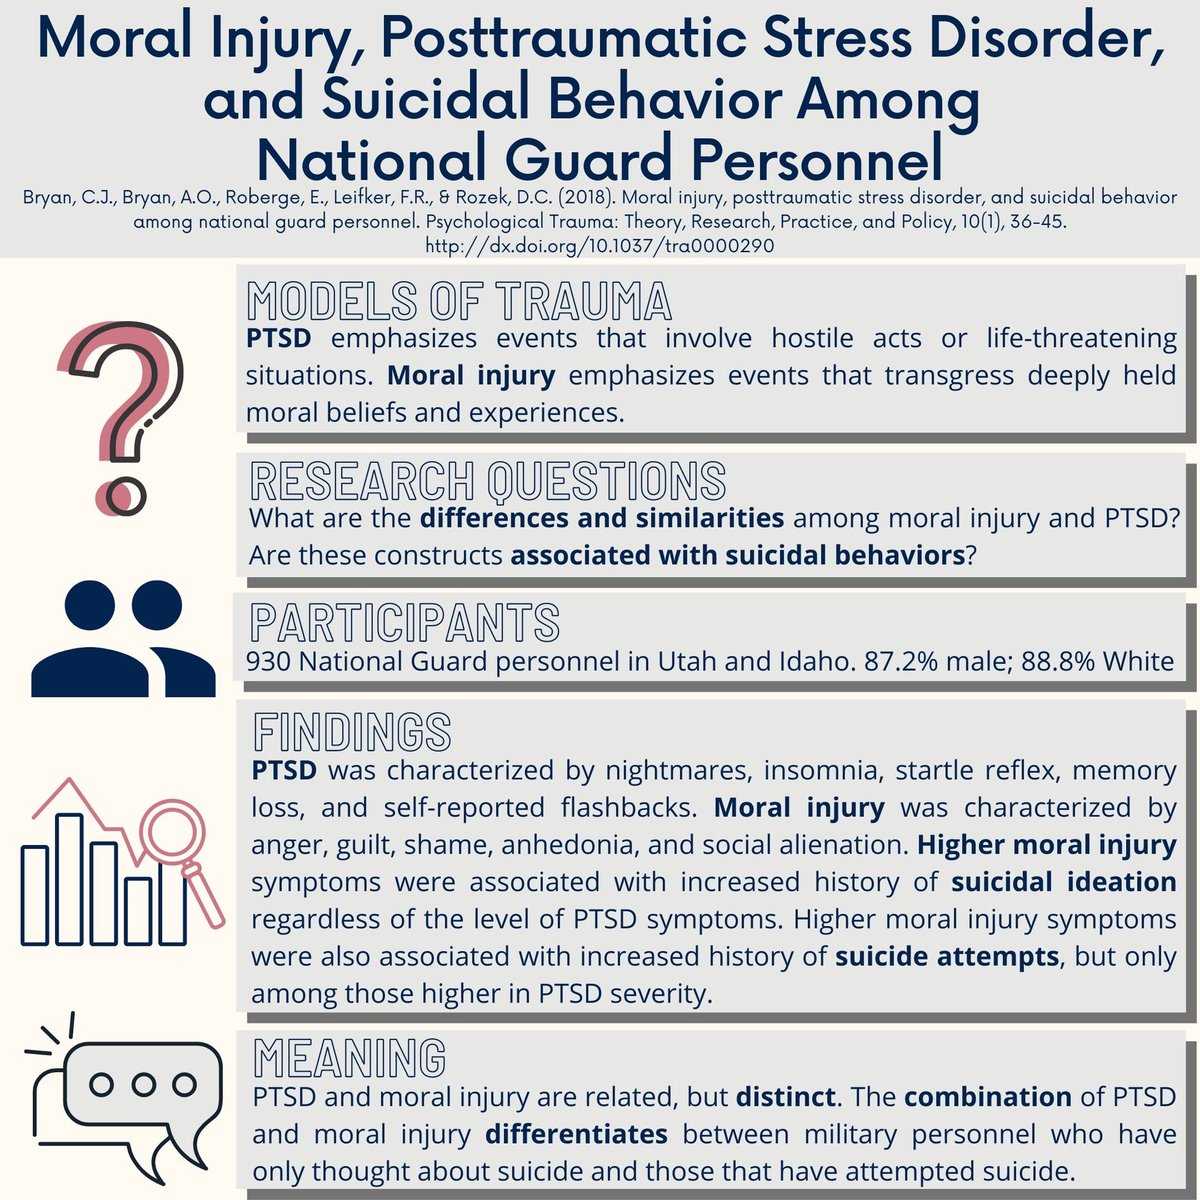 This visual abstract for #SuicidePreventionMonth highlights the association between moral injury, PTSD, and suicidal behavior. @craigjbryan, thank you for joining us to share this research!